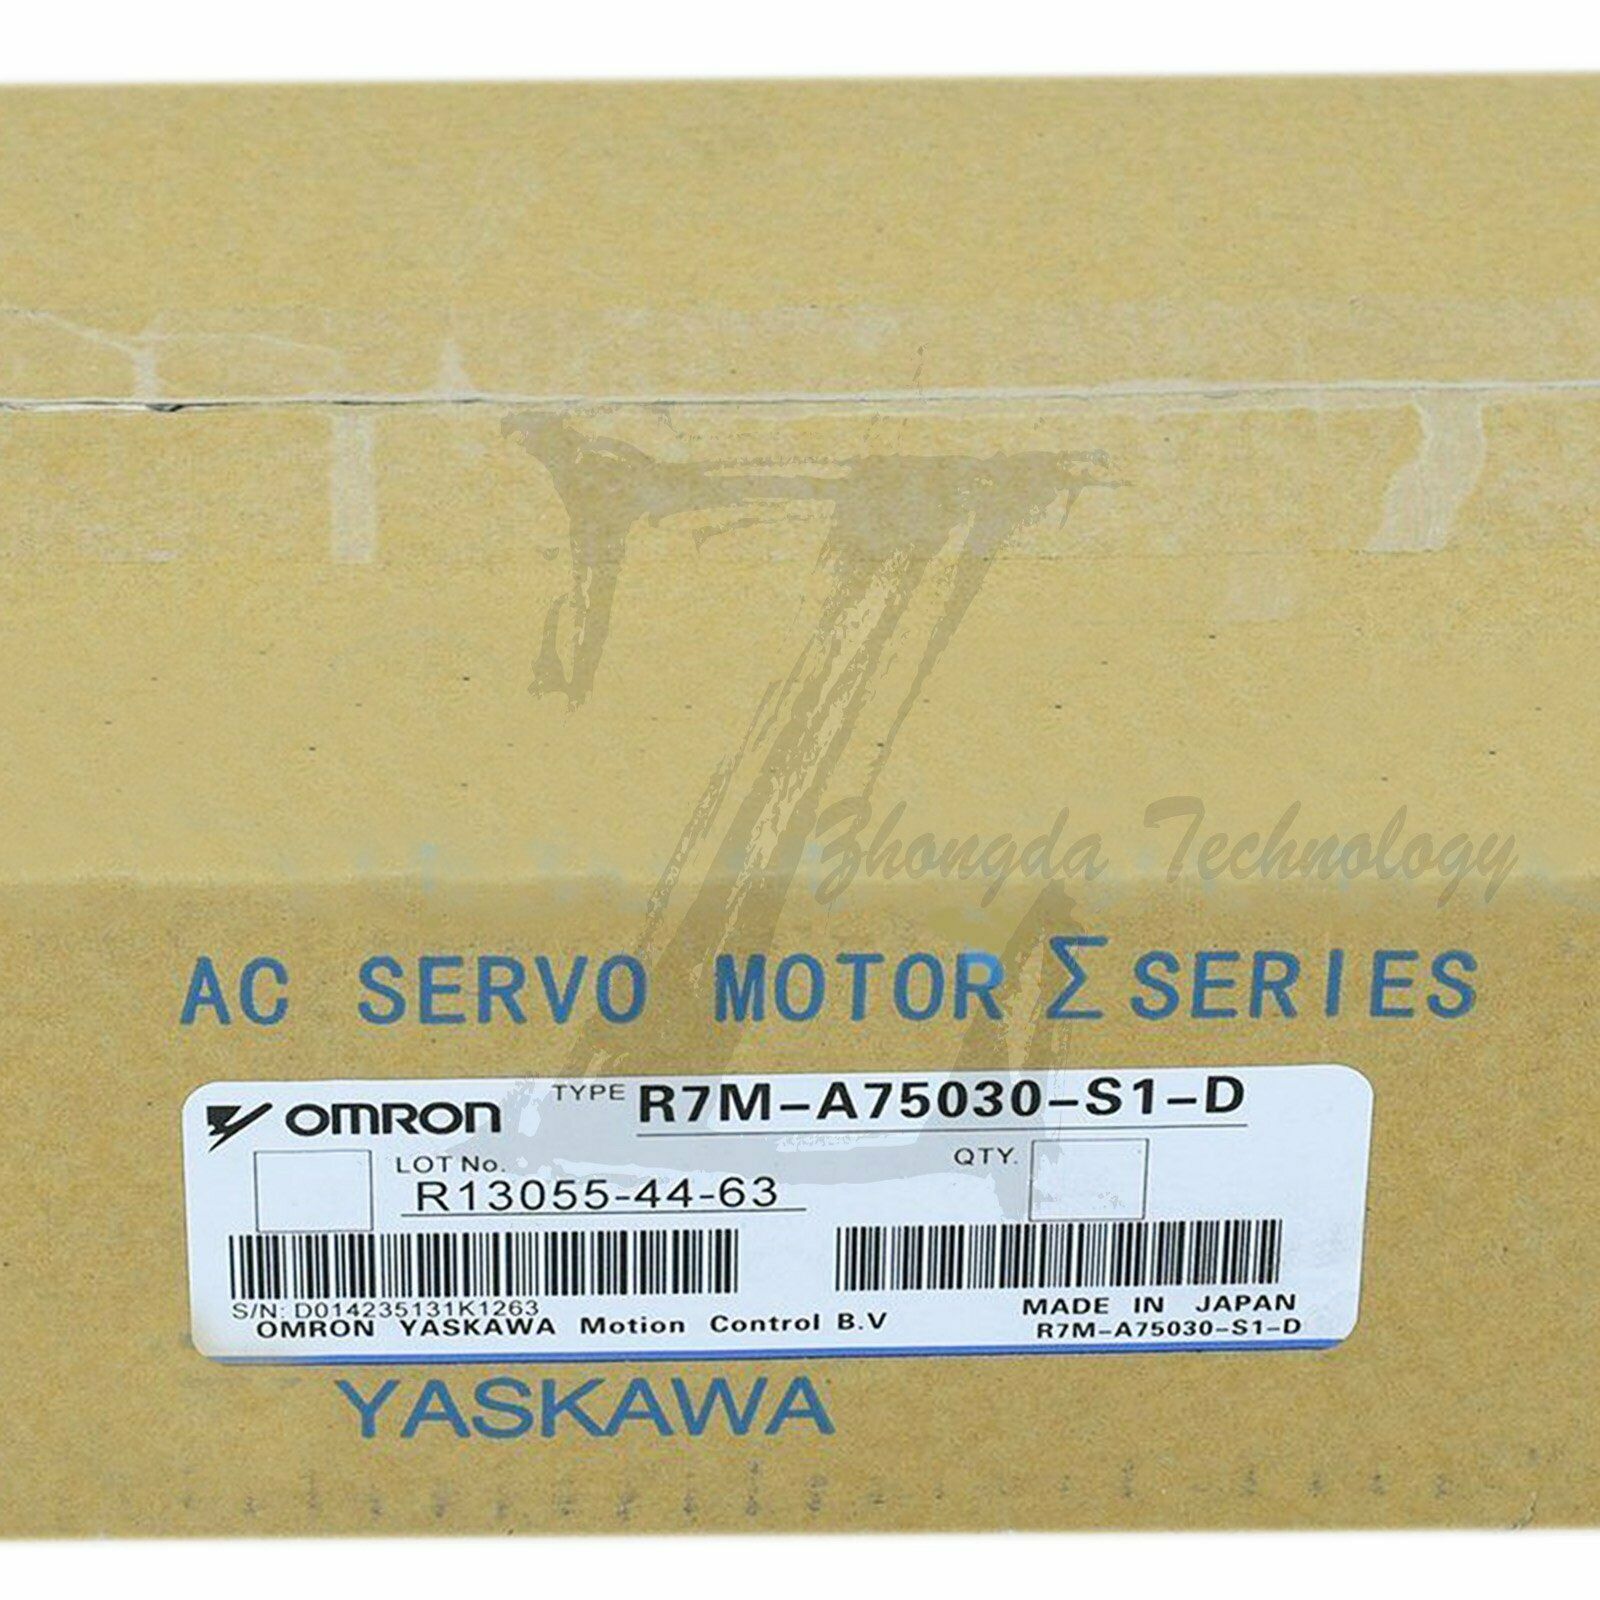 1Pc new Omron R7M-A75030-S1-D servo motor one year warranty KOEED 201-500, 80%, import_2020_10_10_031751, Omron, Other